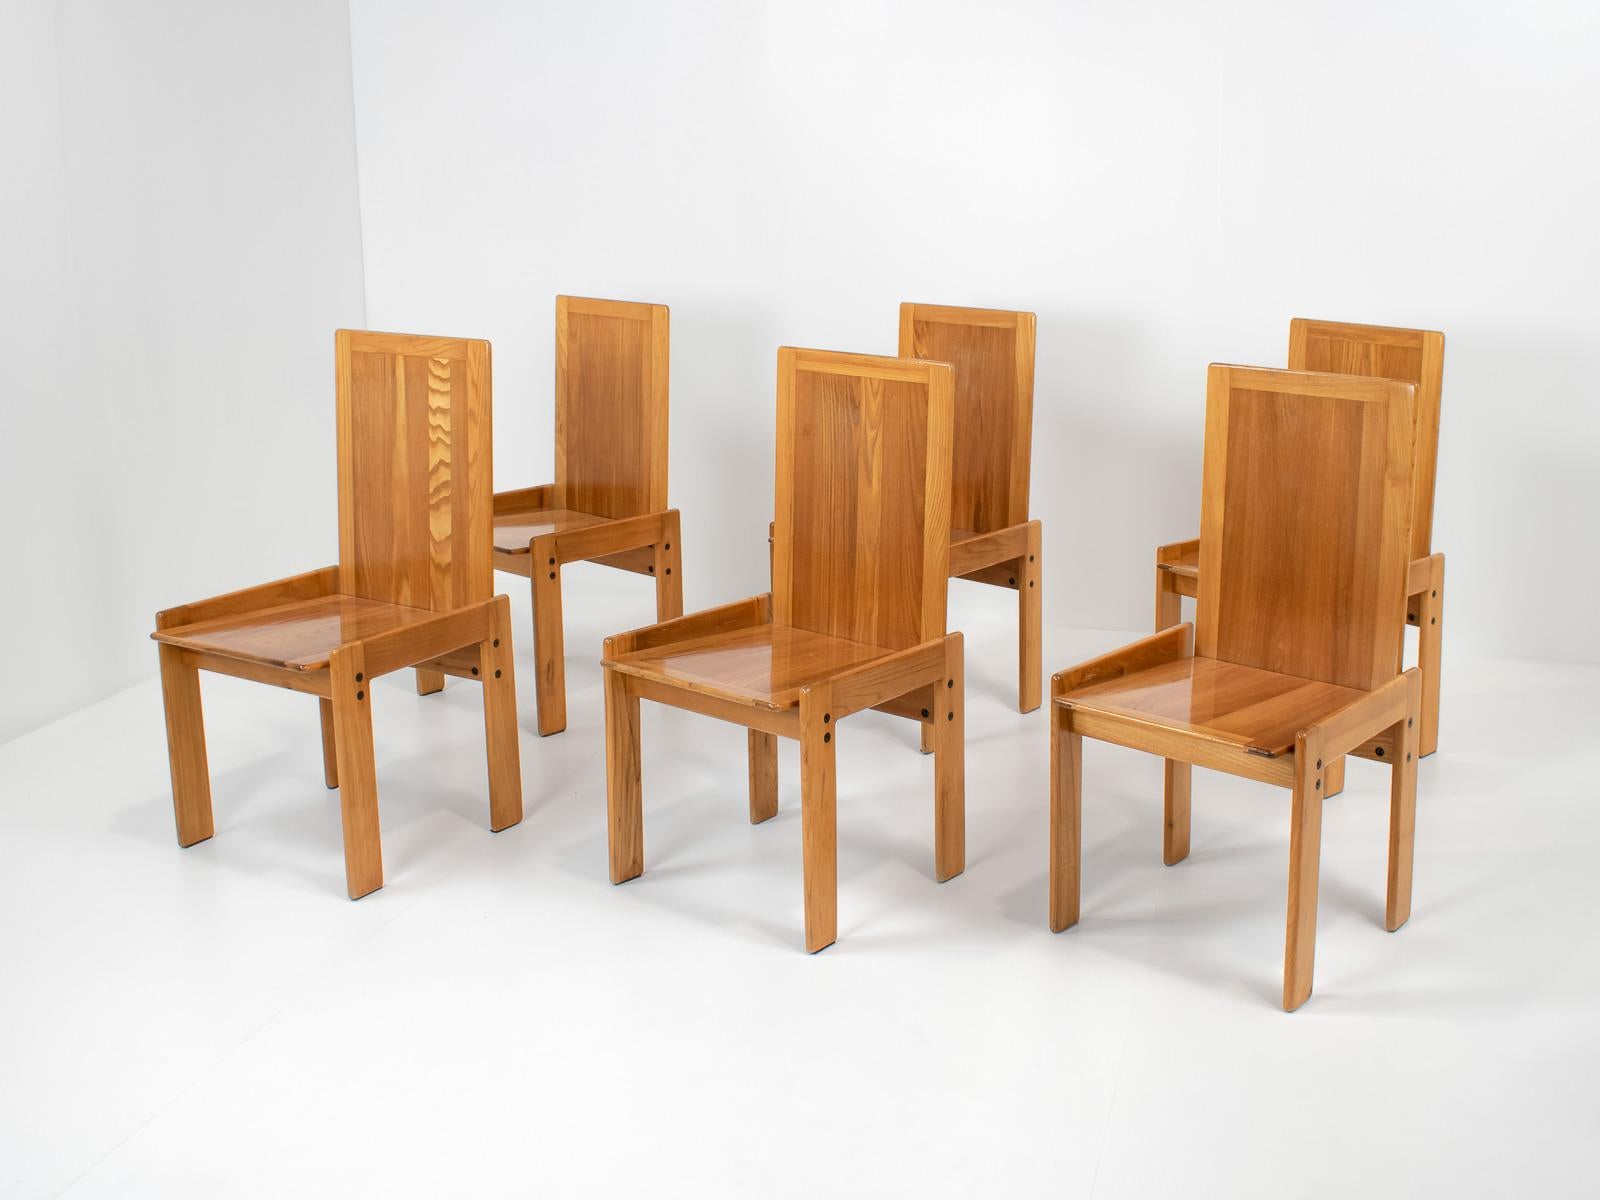 A set of 6 chairs in pale elm wood. It perfectly matches any kind of natural-style table, such as travertine or wood. 
It creates the perfect wabi-sabi style due to its imperfections and naive design.

The design of the chairs is very